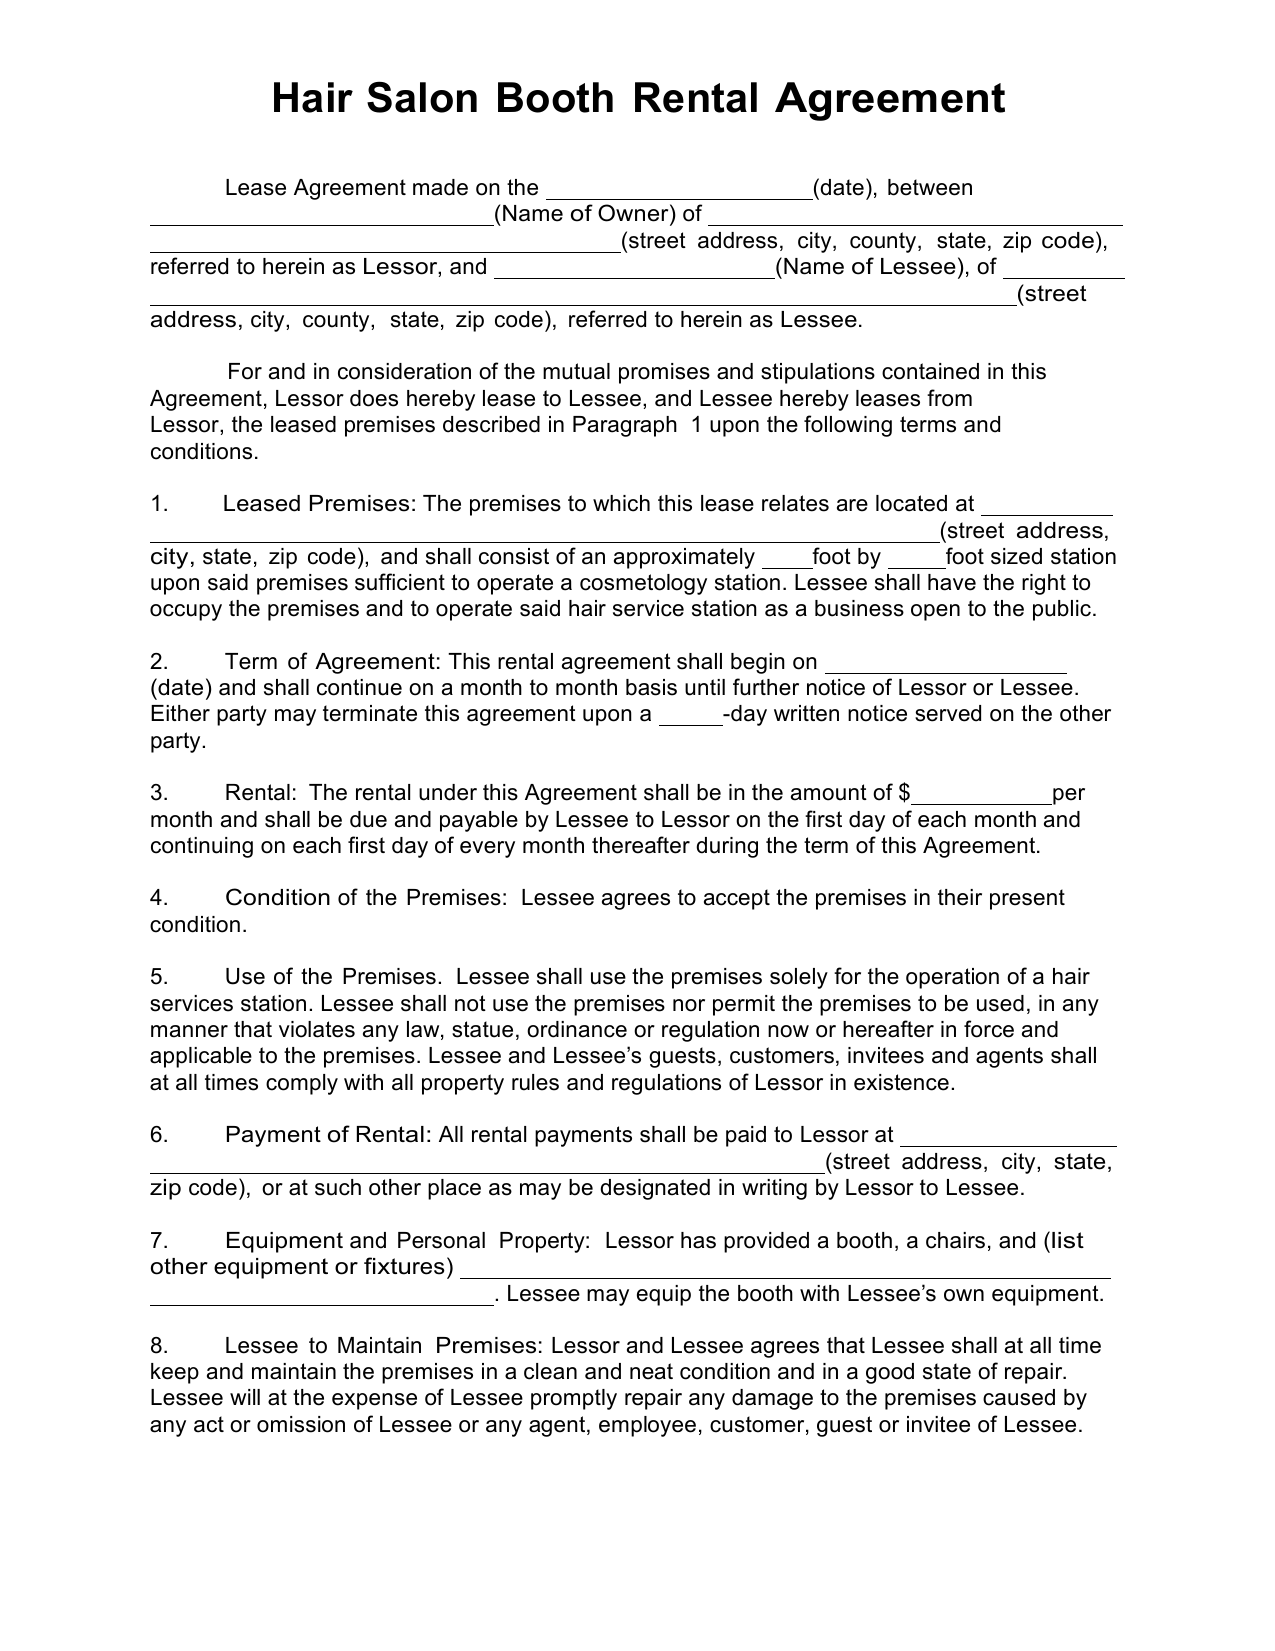 Download Salon Booth Rental Lease Agreement Template PDF RTF Word 